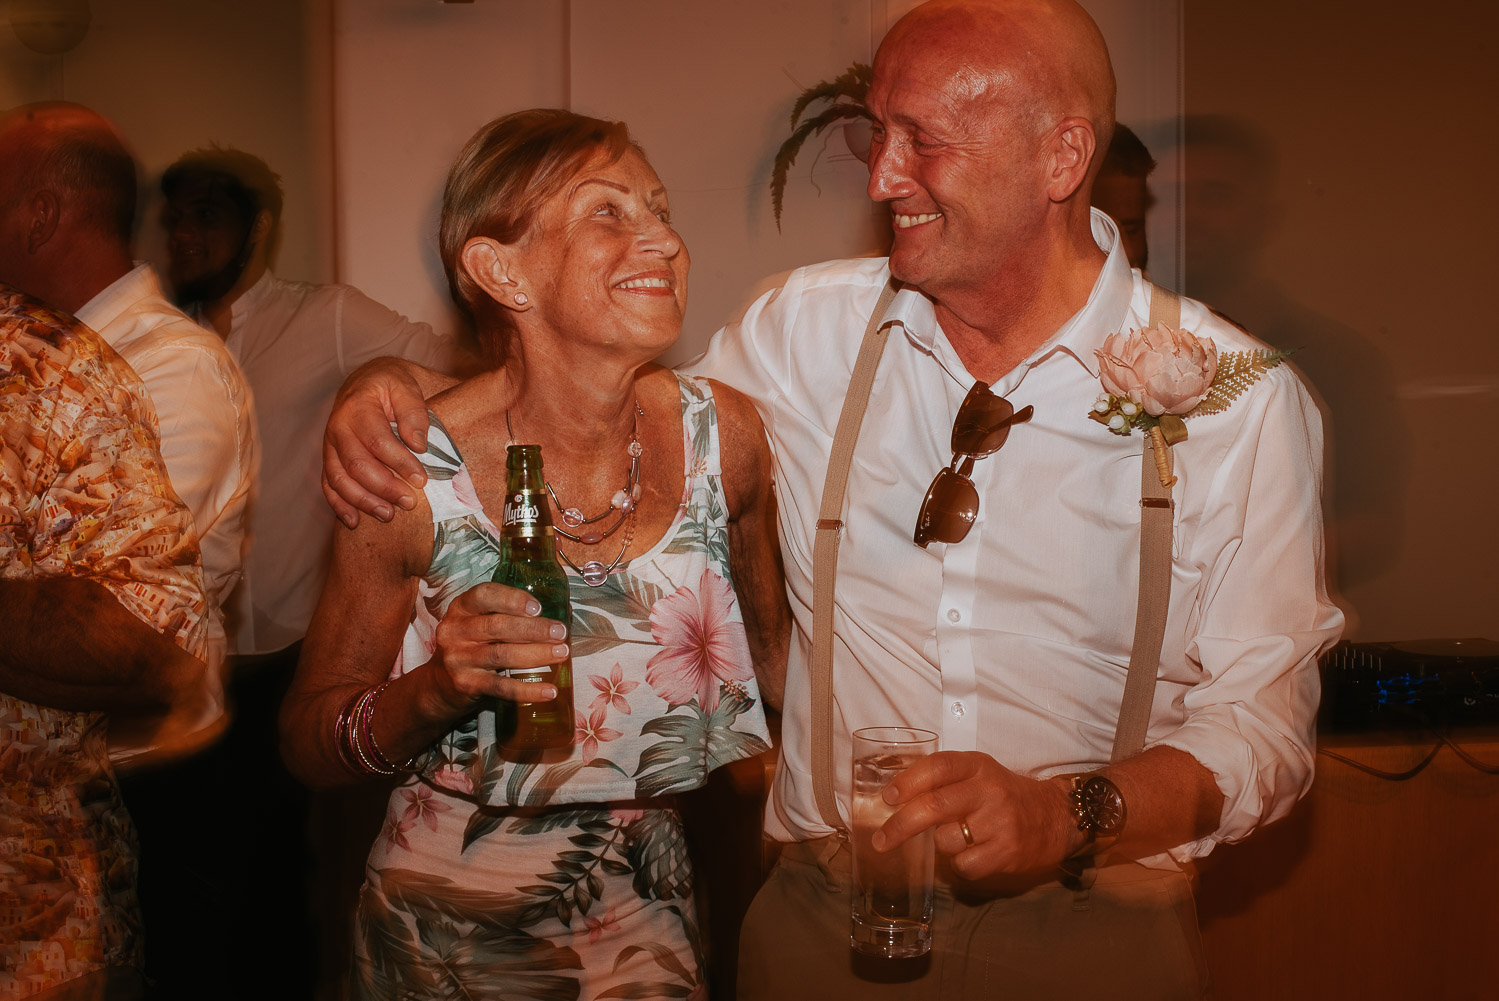 Wedding photographer Santorini: close up of a wedding guest couple smiling with drinks in their hands by Ben and Vesna.